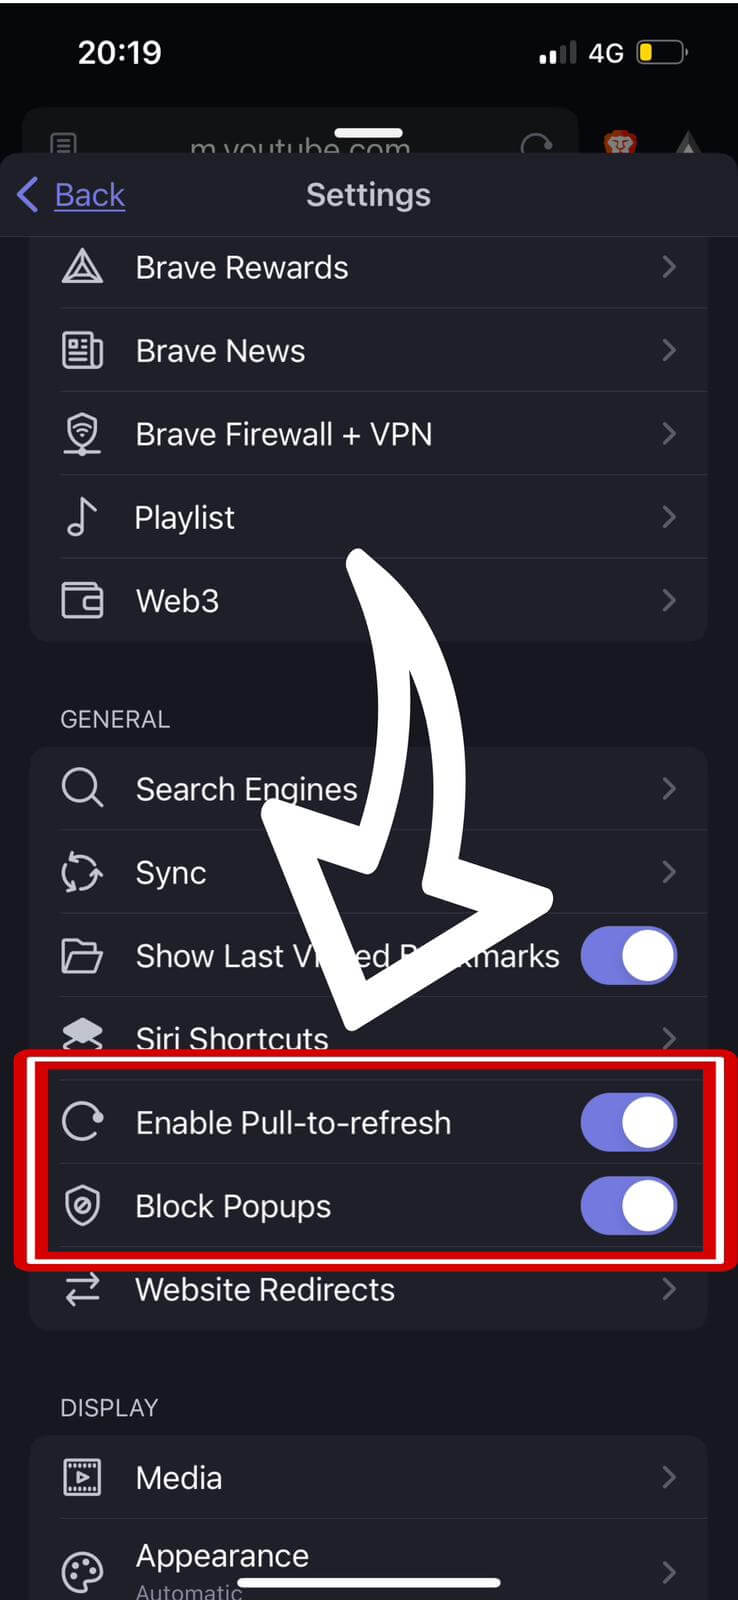 Enable Pull-to-Refresh and Block Popups